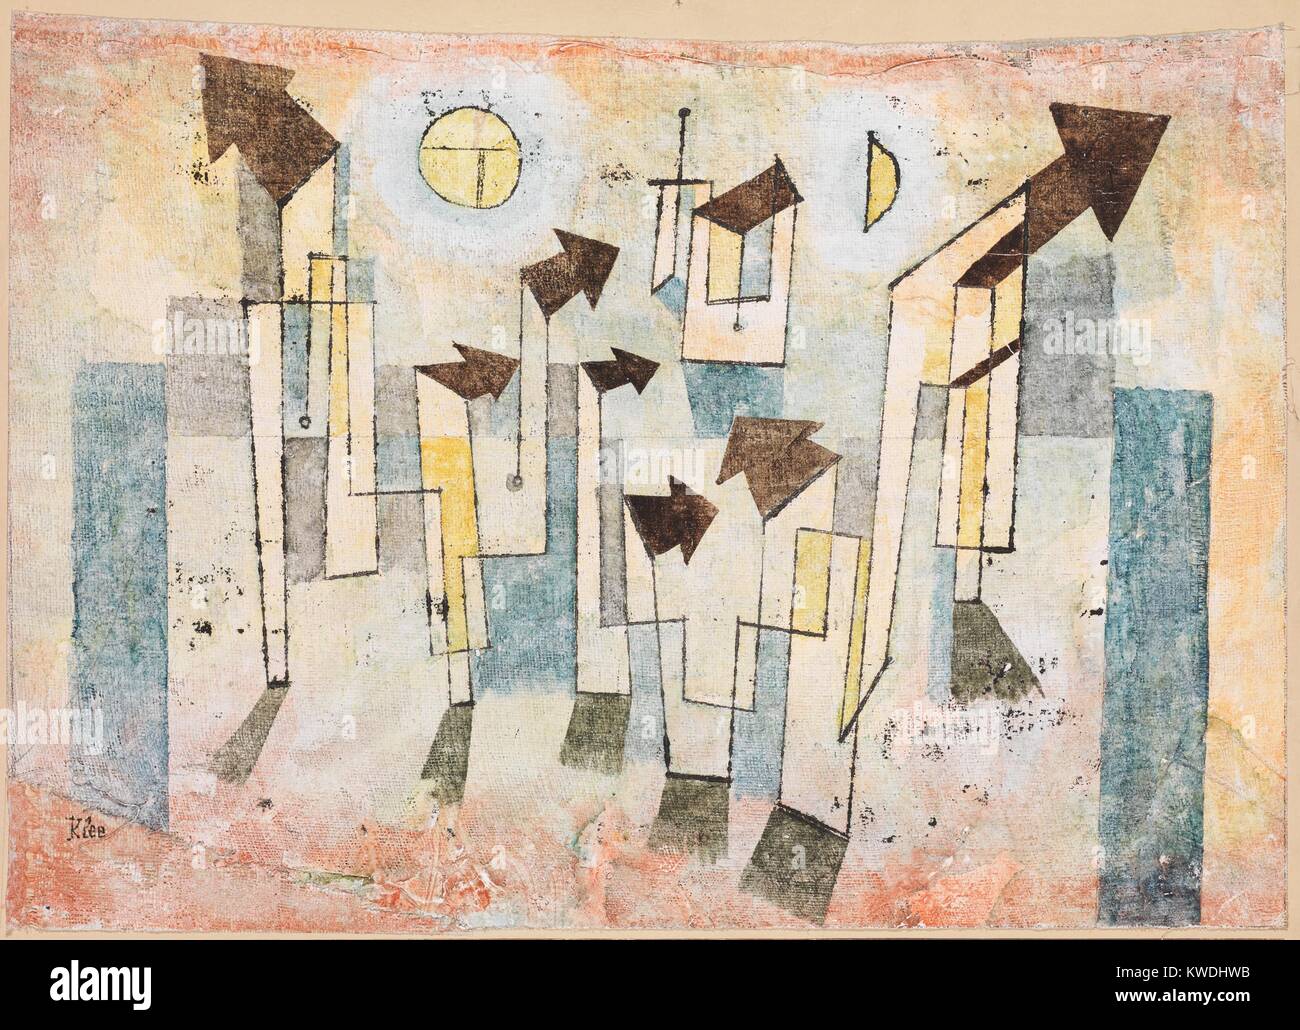 MURAL FROM THE TEMPLE OF LONGING THITHER, by Paul Klee, 1922, Swiss painting, watercolor and ink. Illusionistic geometric abstraction is sweetly colored with primary and secondary colors (BSLOC 2017 7 50) Stock Photo